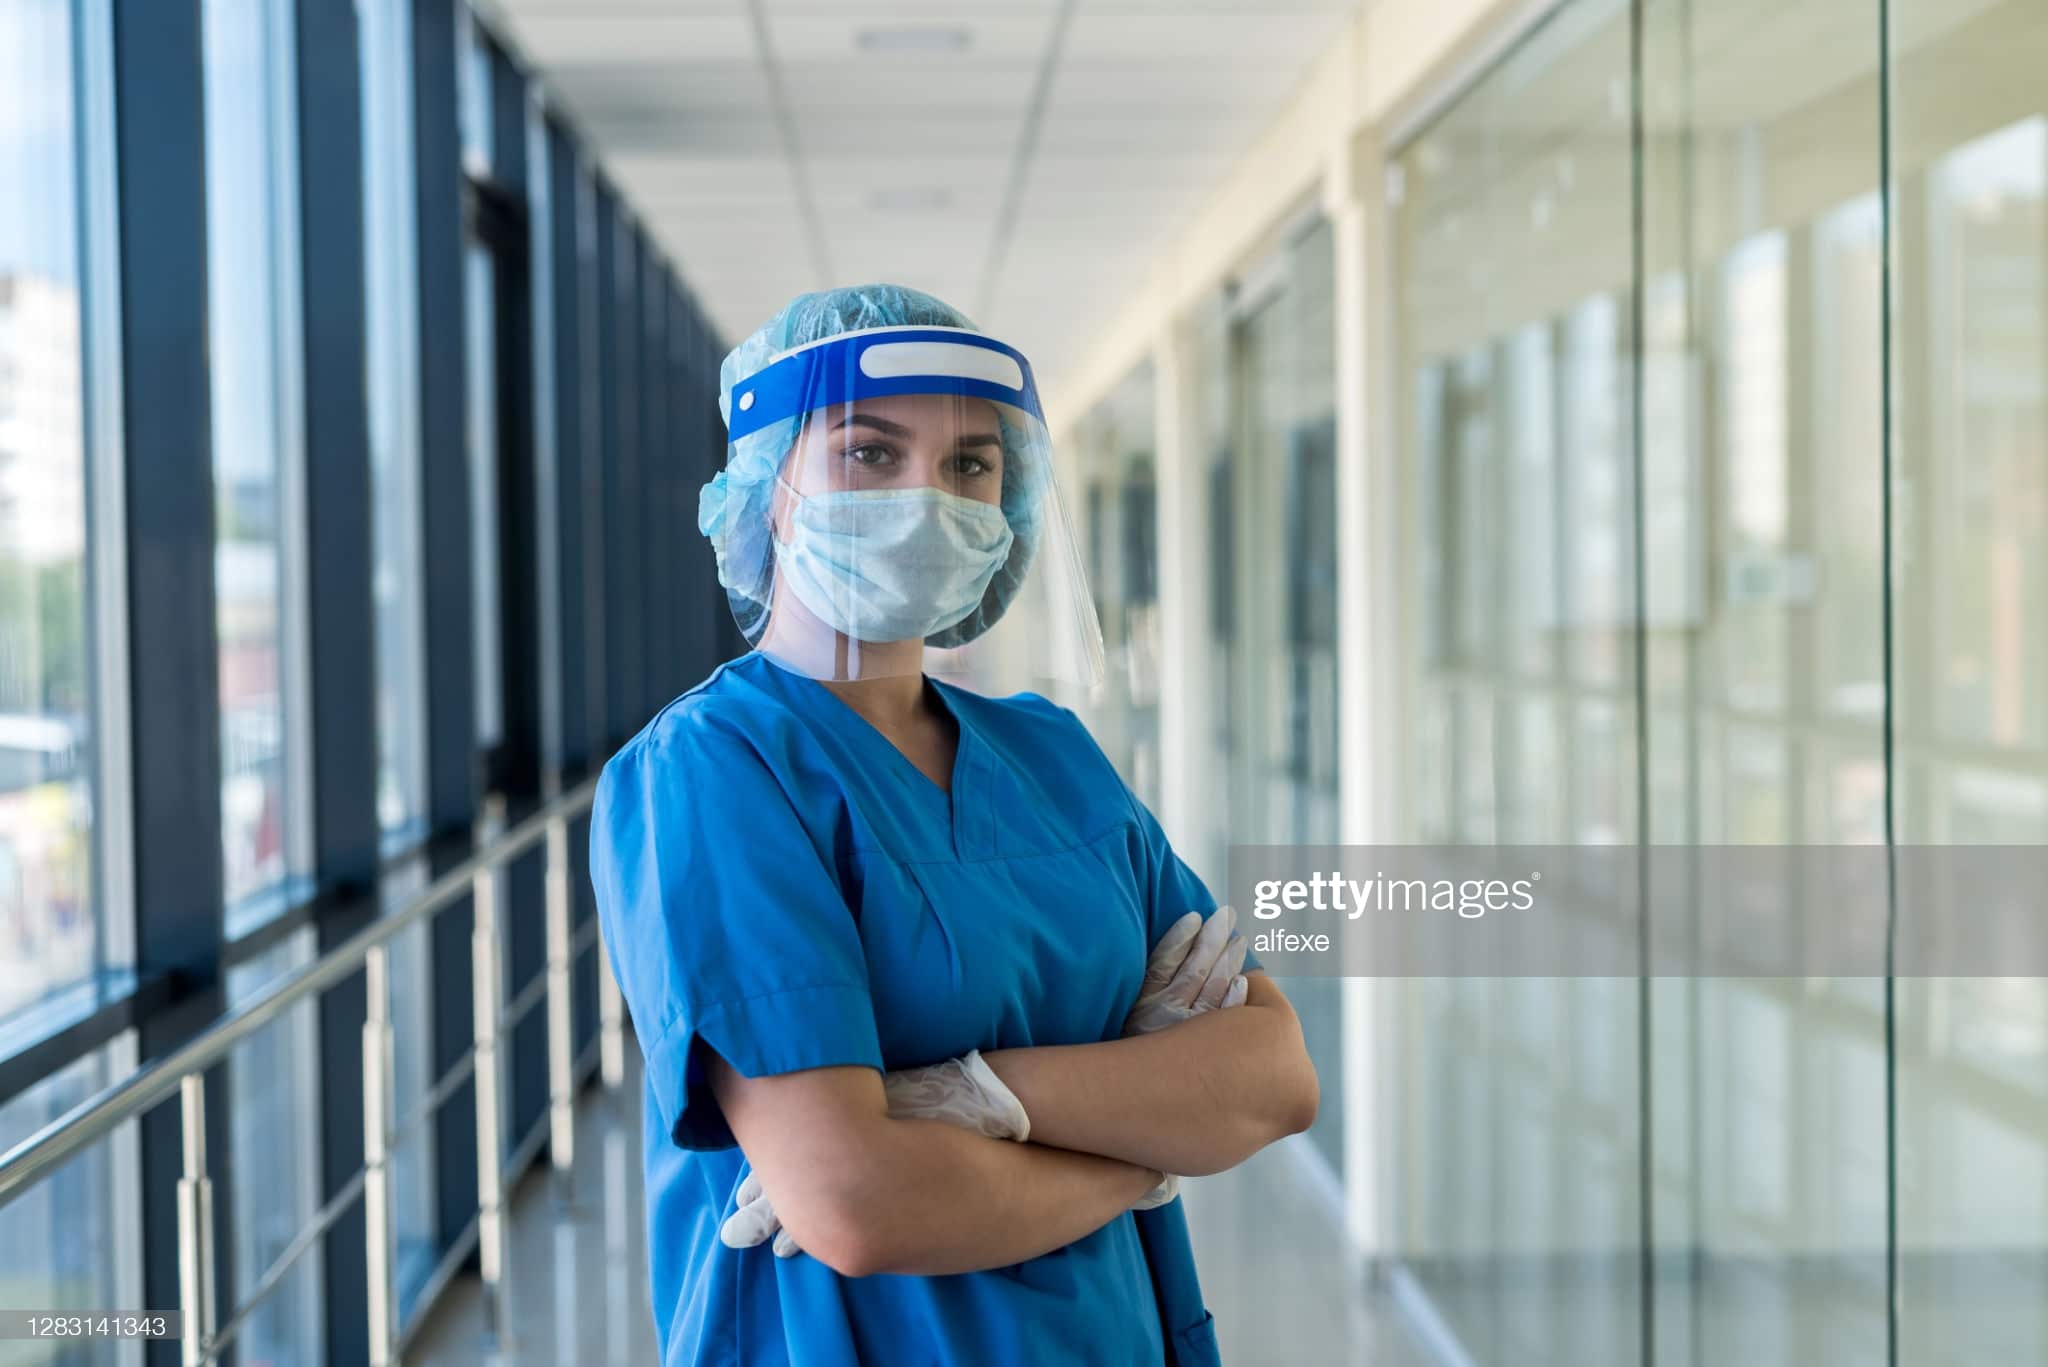 Healthcare worker in PPE crossing their arms